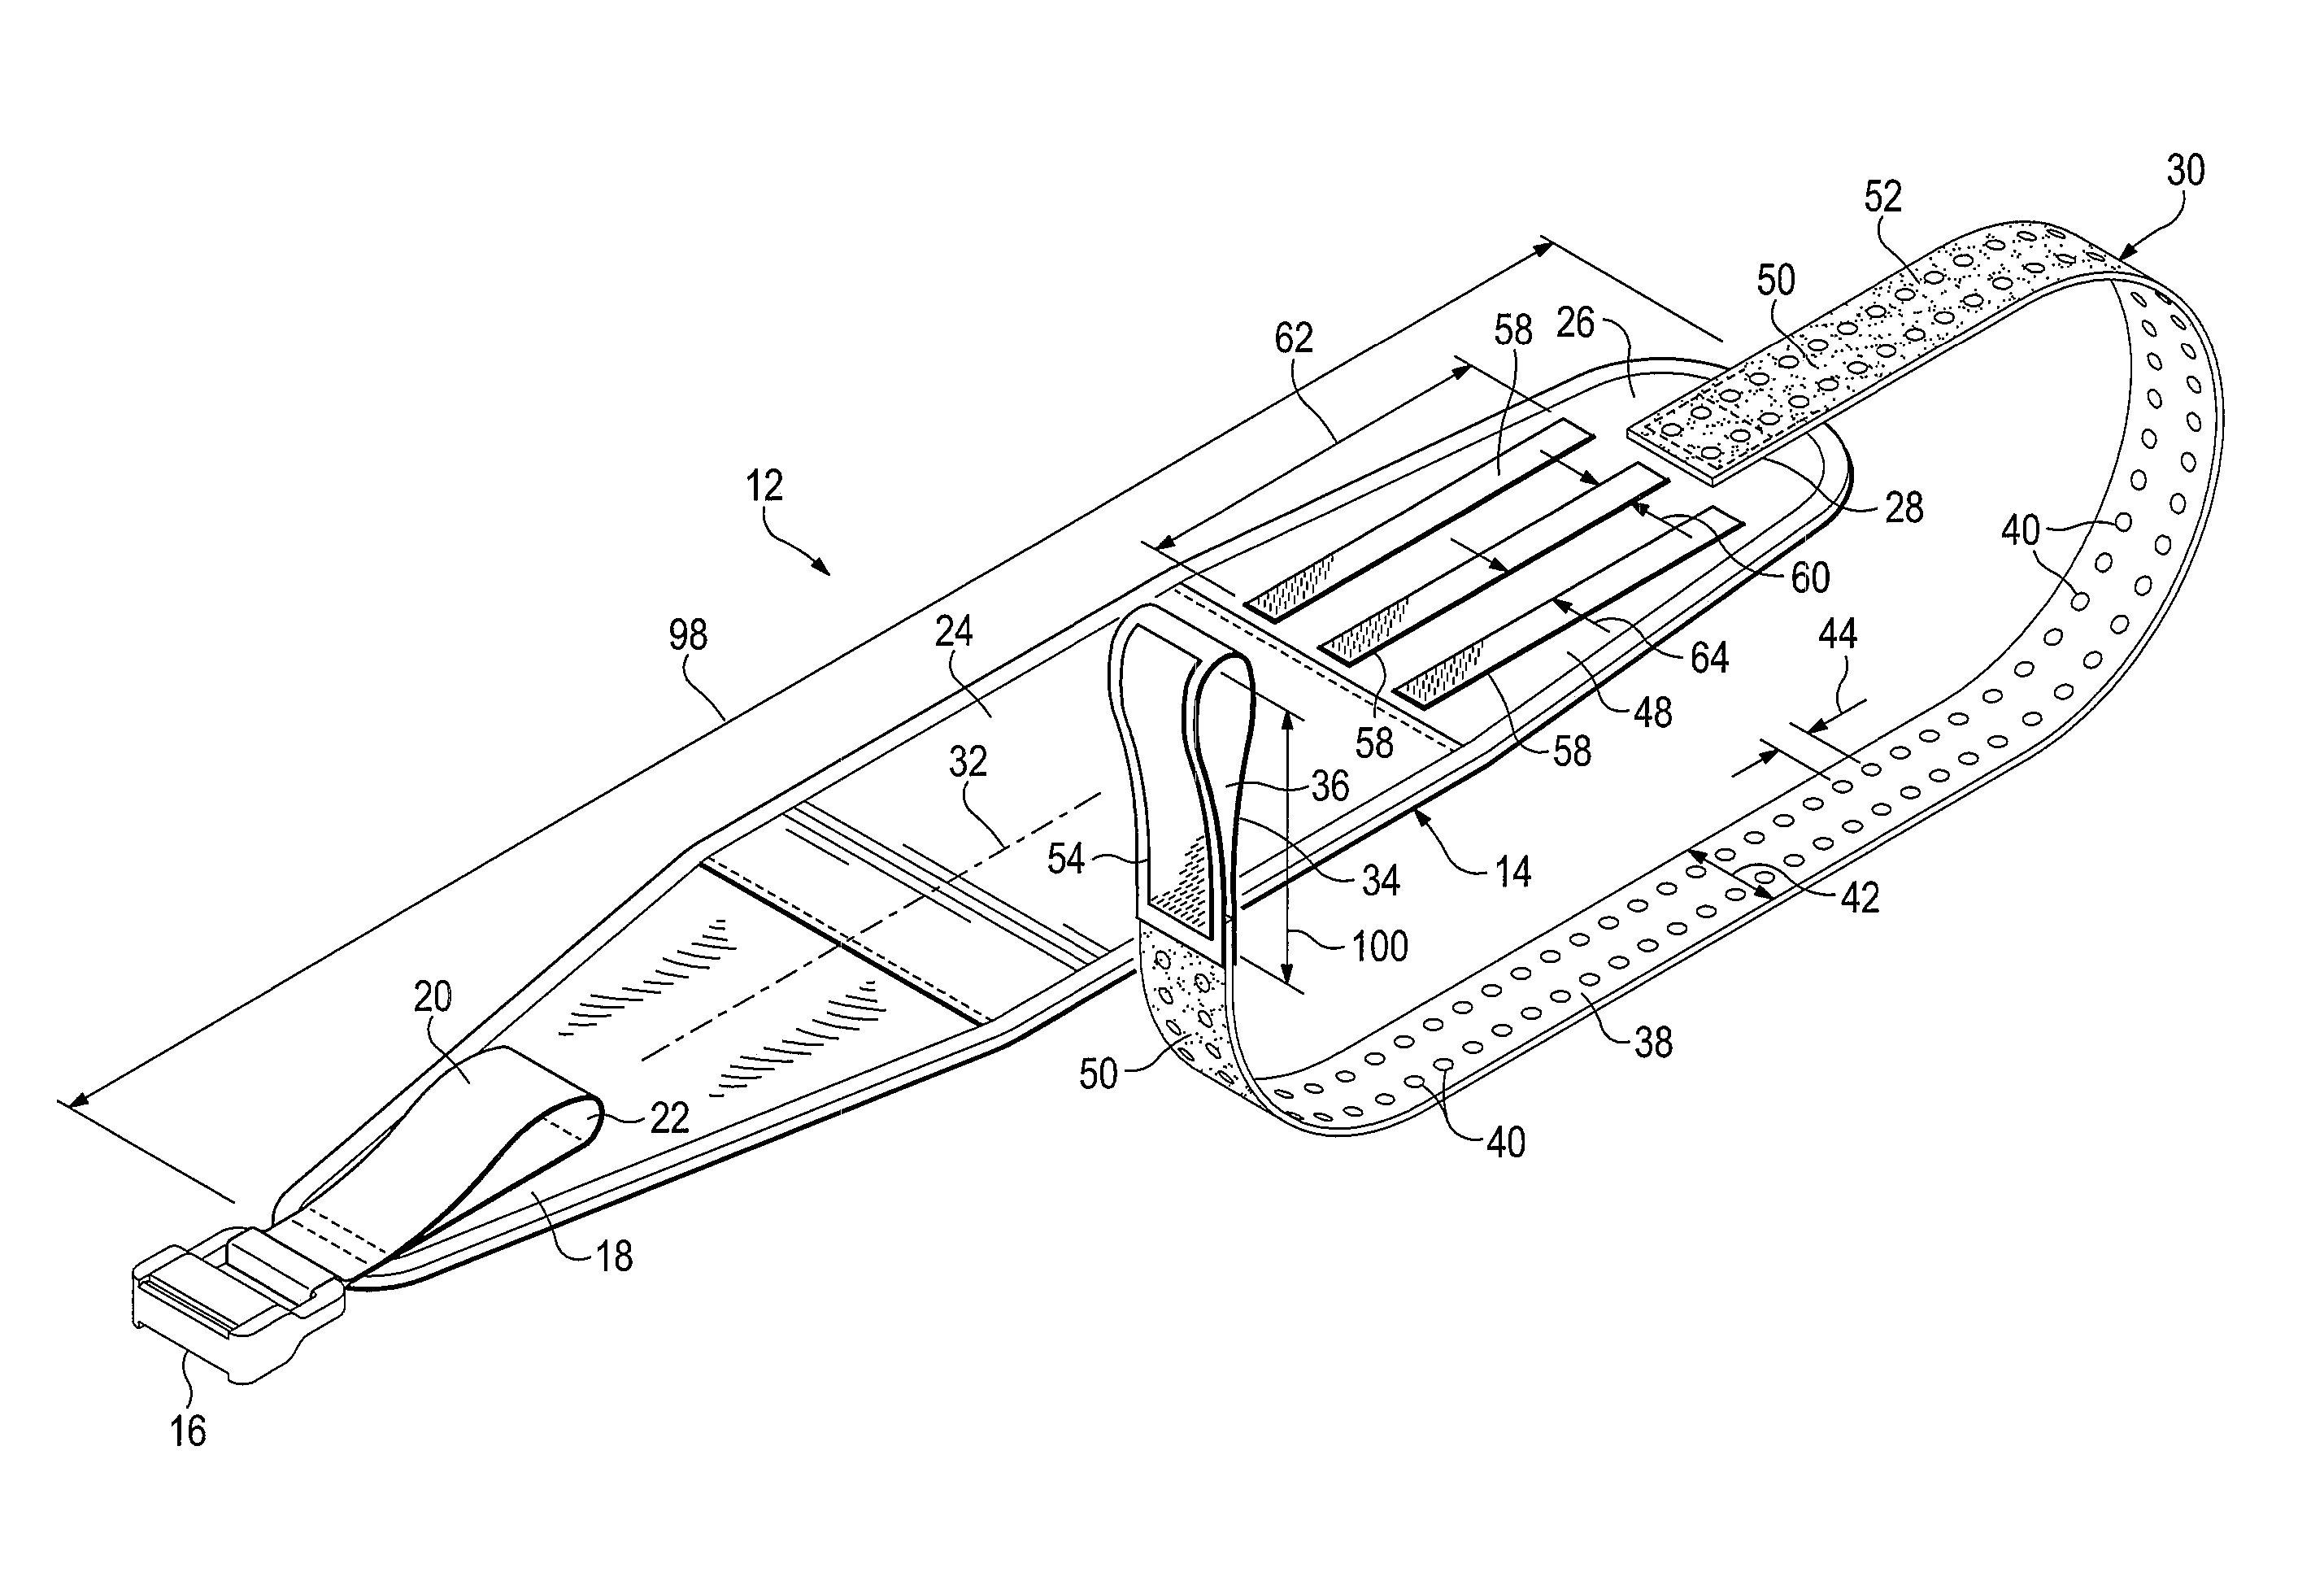 Device for control of hemorrhage including stabilized point pressure device